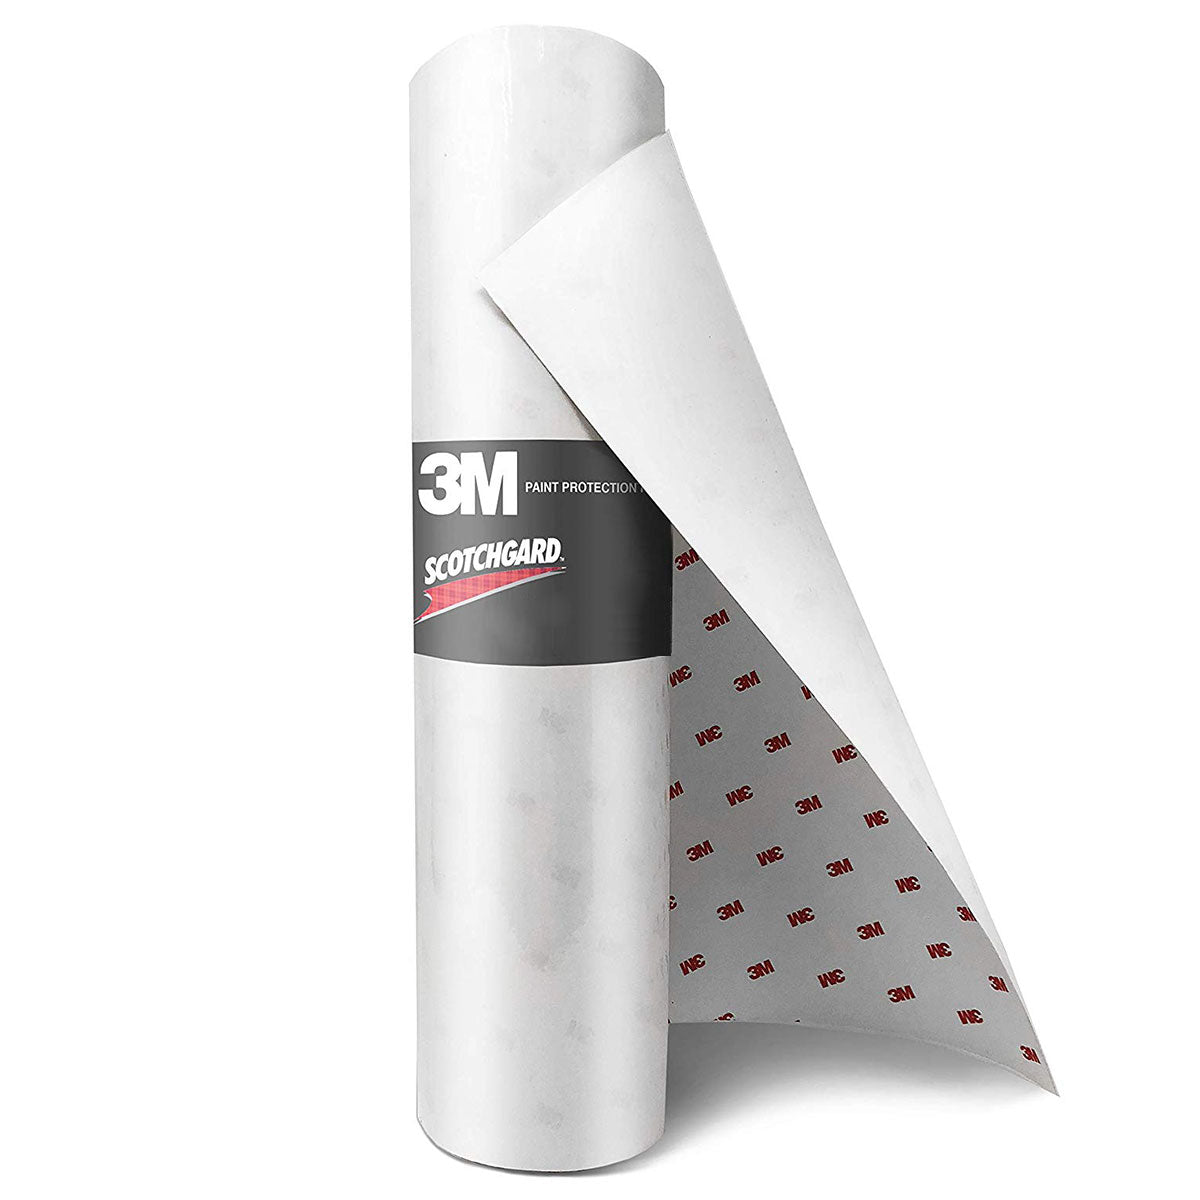 3M Paint Protection  Buy Online on SIR VISUAL